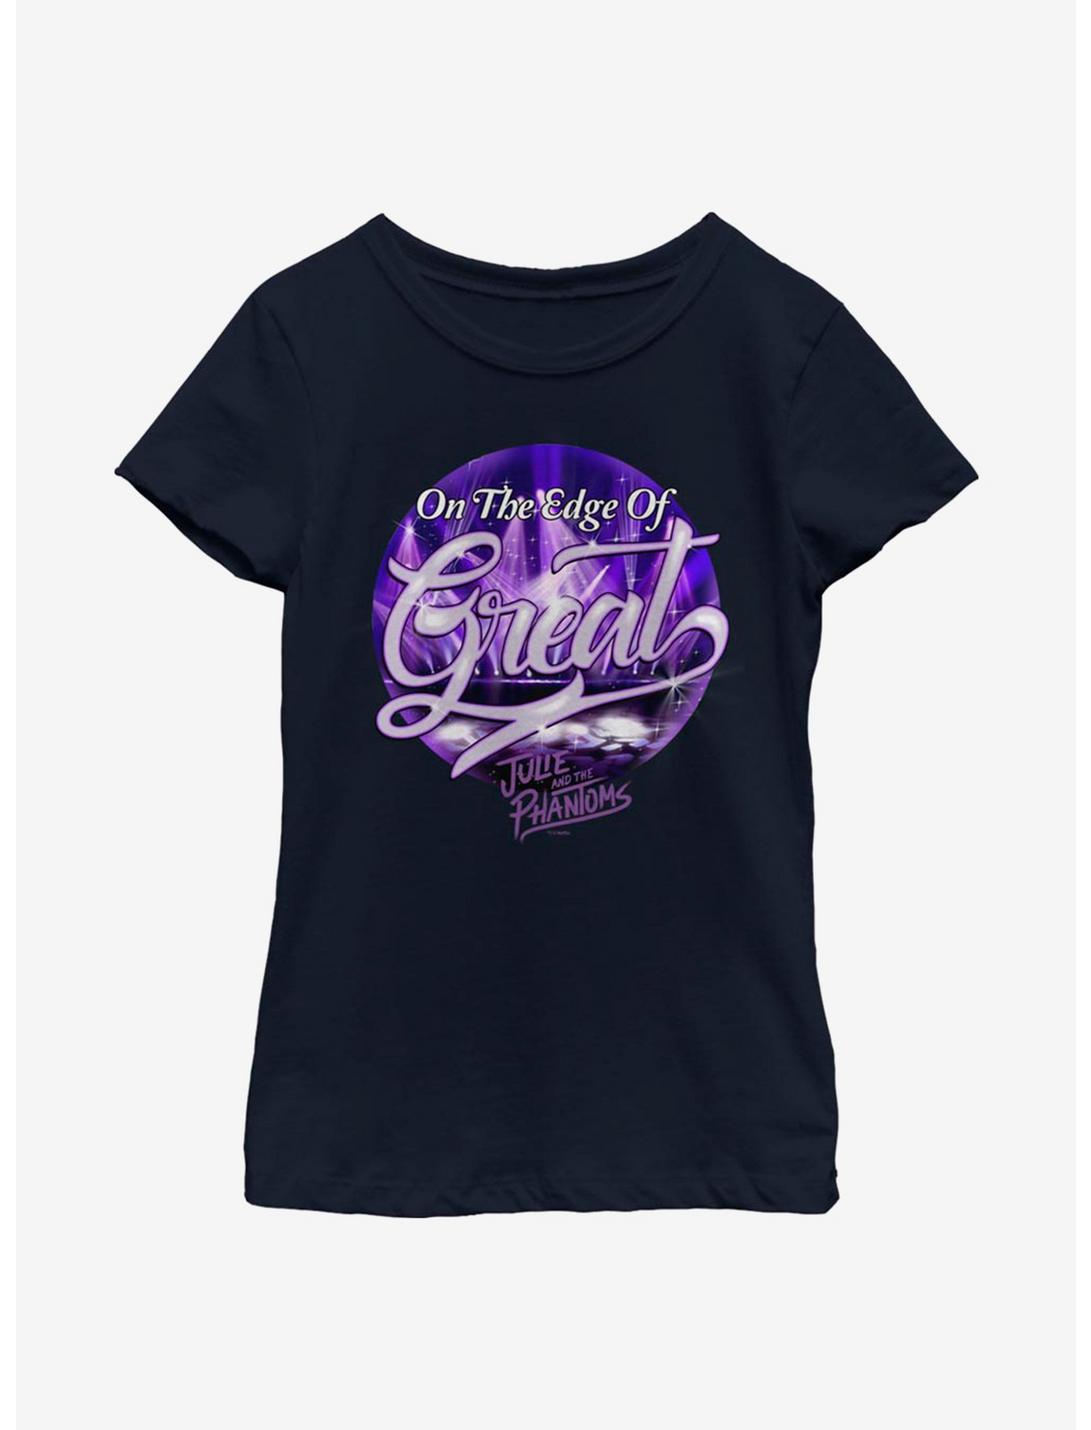 Julie And The Phantoms Great Edge Youth Girls T-Shirt, NAVY, hi-res